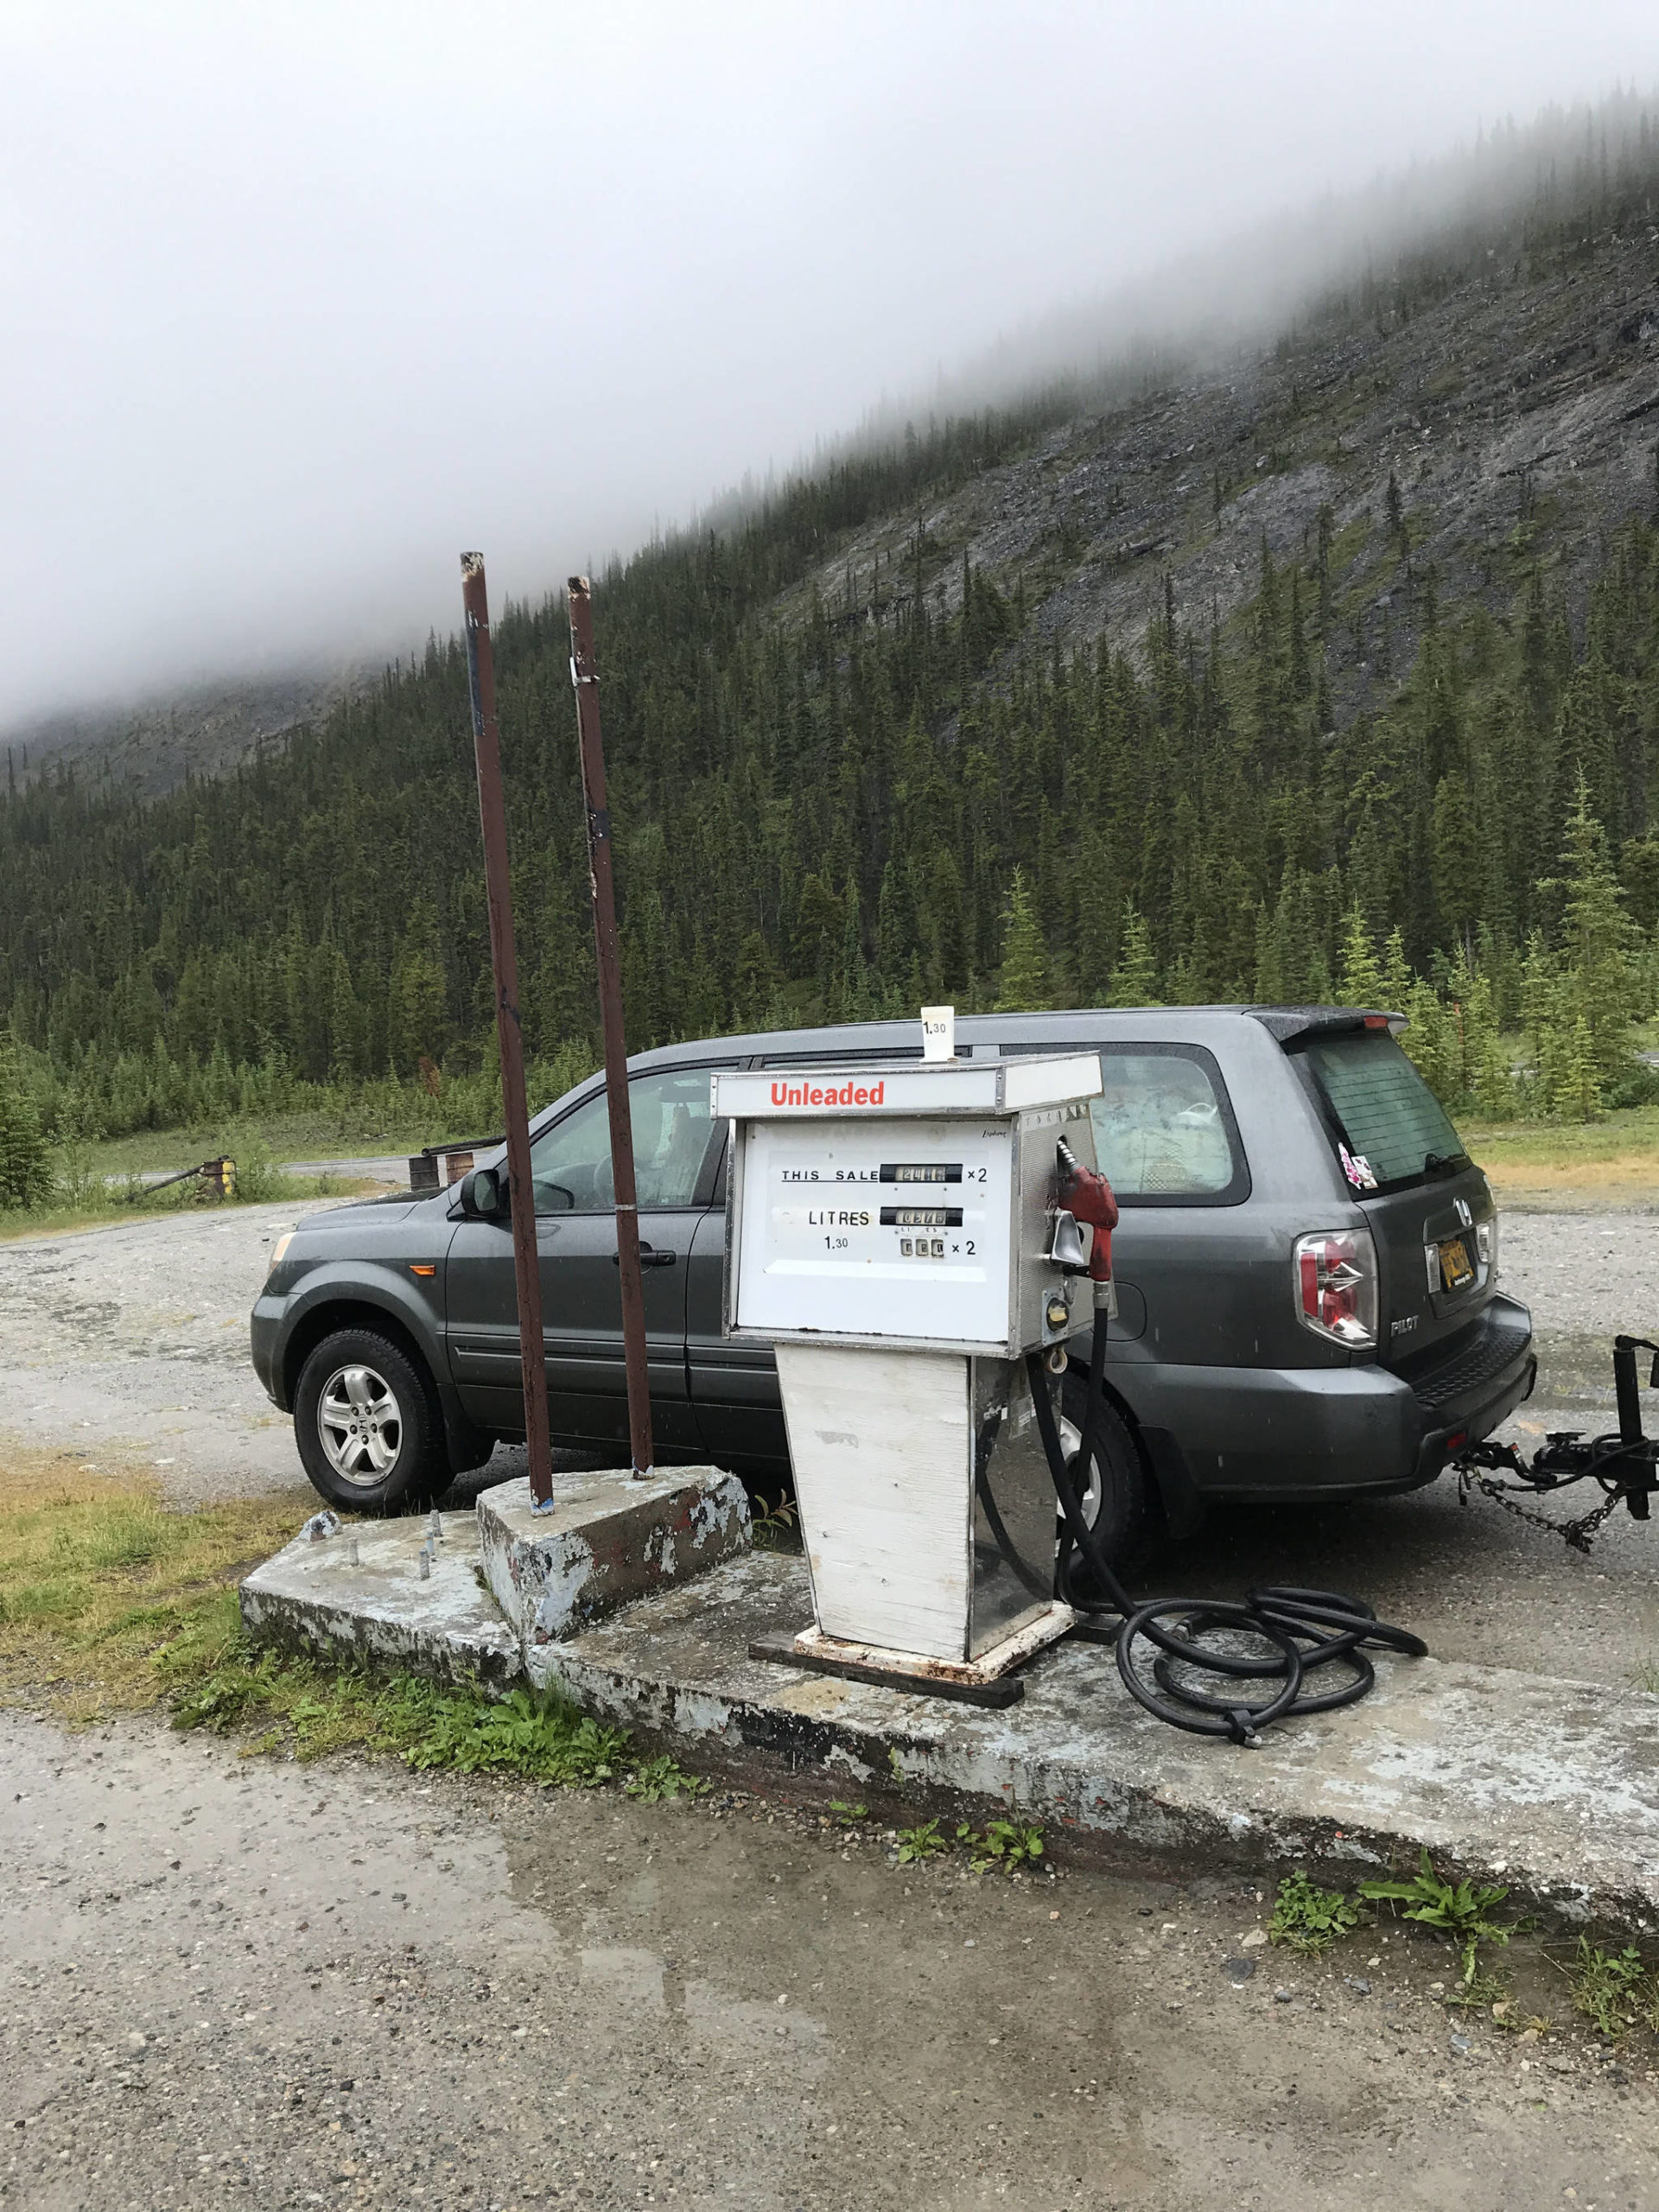 Getting gas along the Alaska Highway on July 16, 2020. (Photo provided)